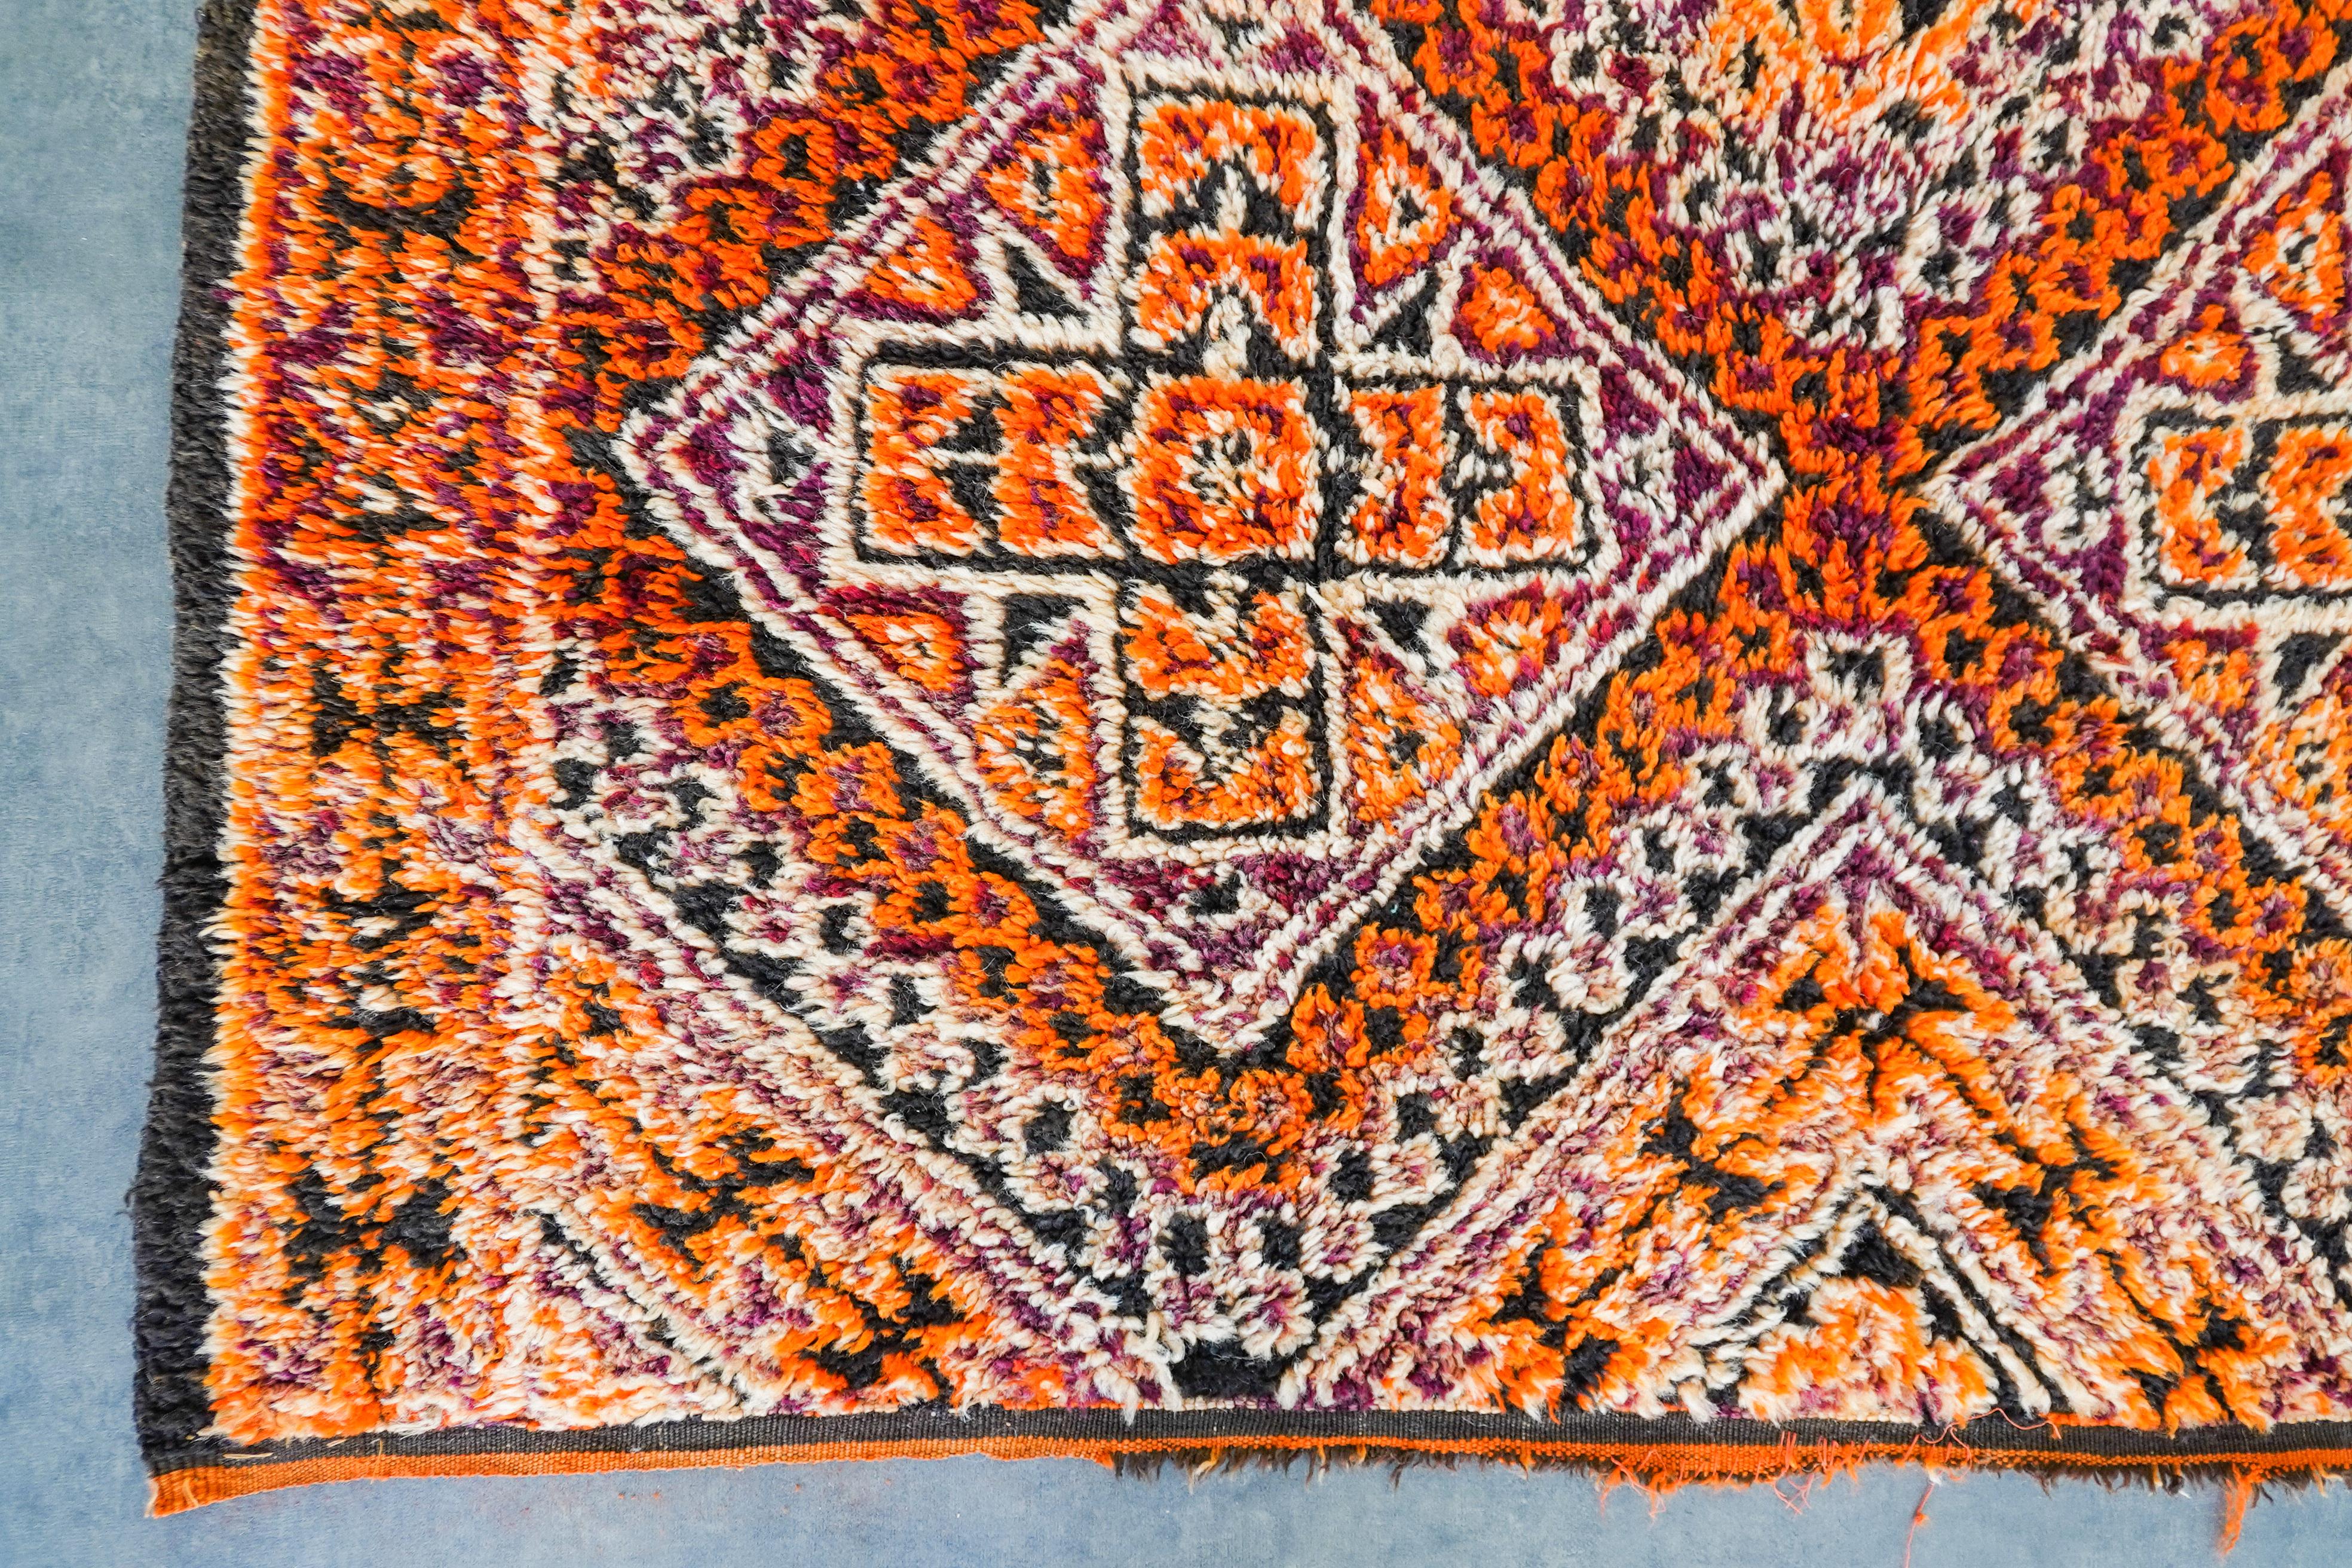 Hand-Knotted Orange Vintage Moroccan rug from 70s  100% wool  5.2x11 Ft 160x330 Cm For Sale